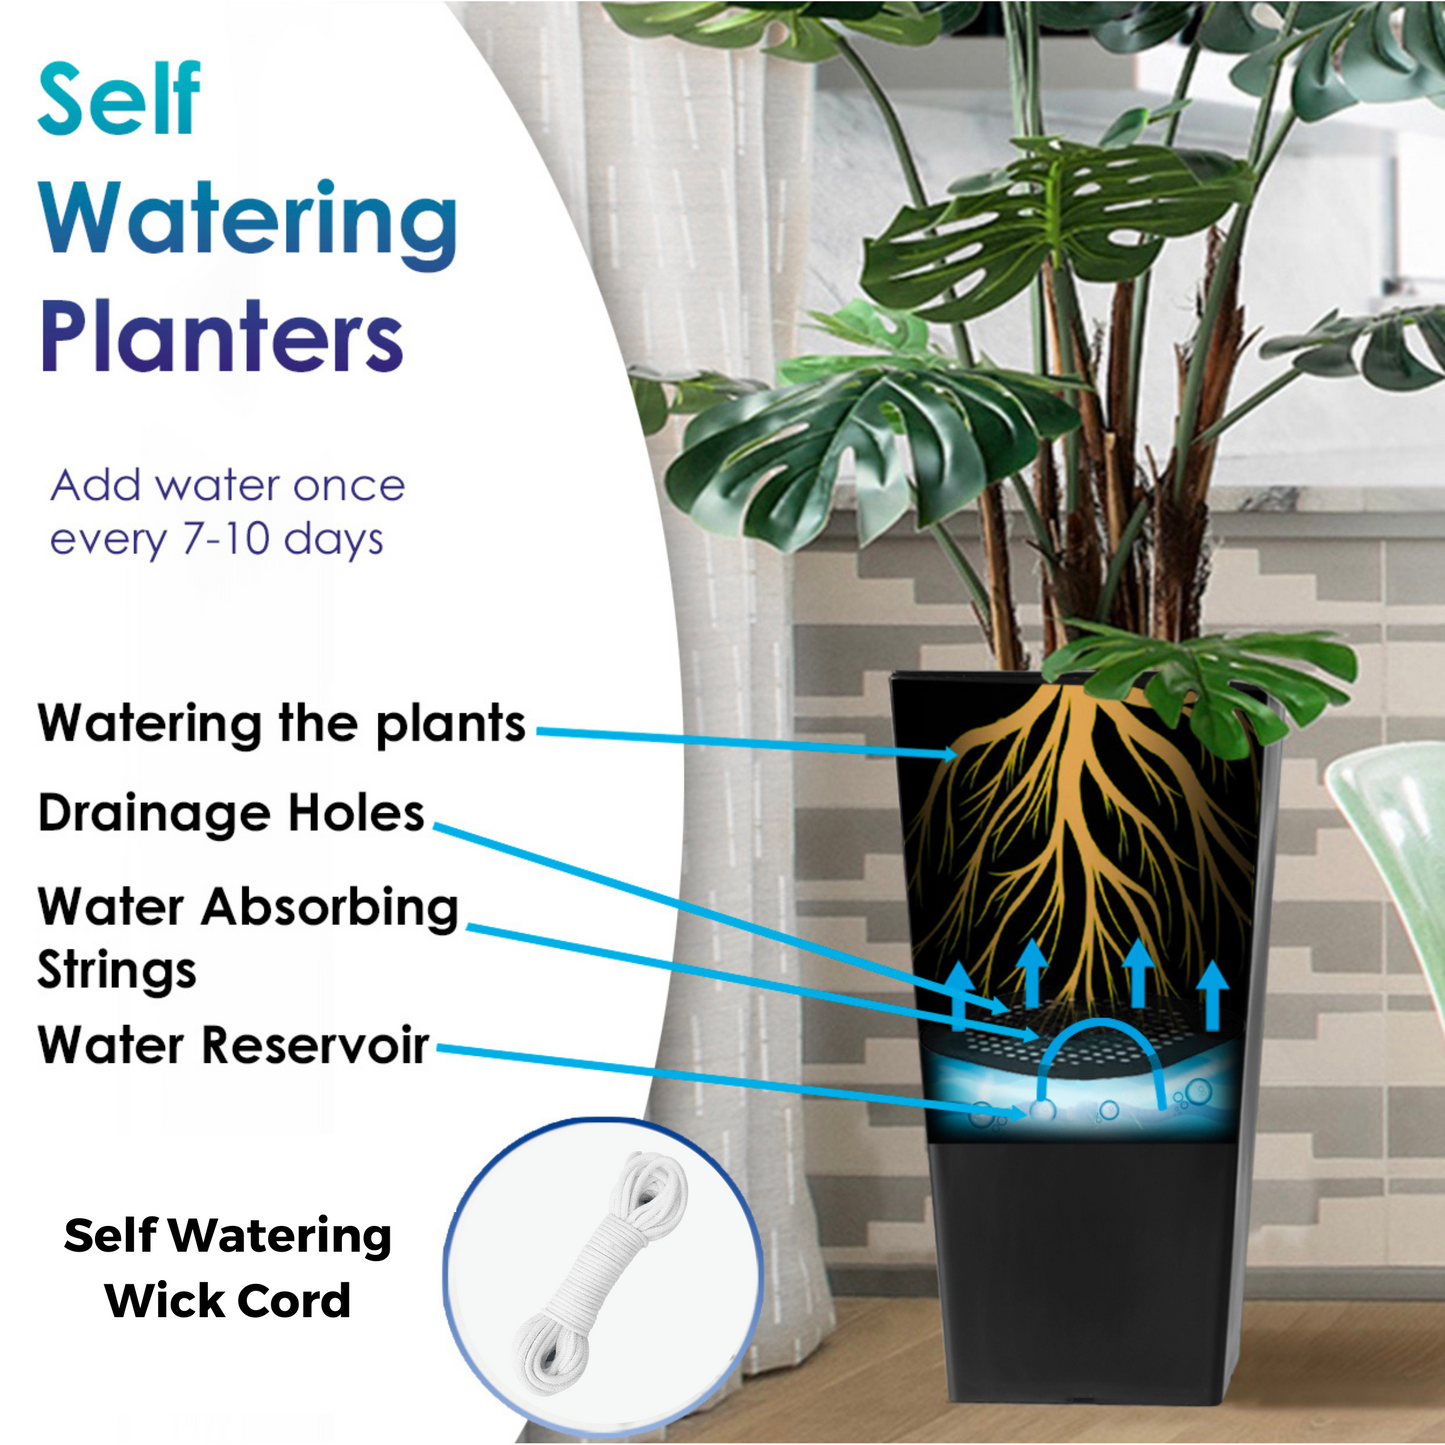 Buy Now Tall Planter with Planting Baskets (Self Watering) Online